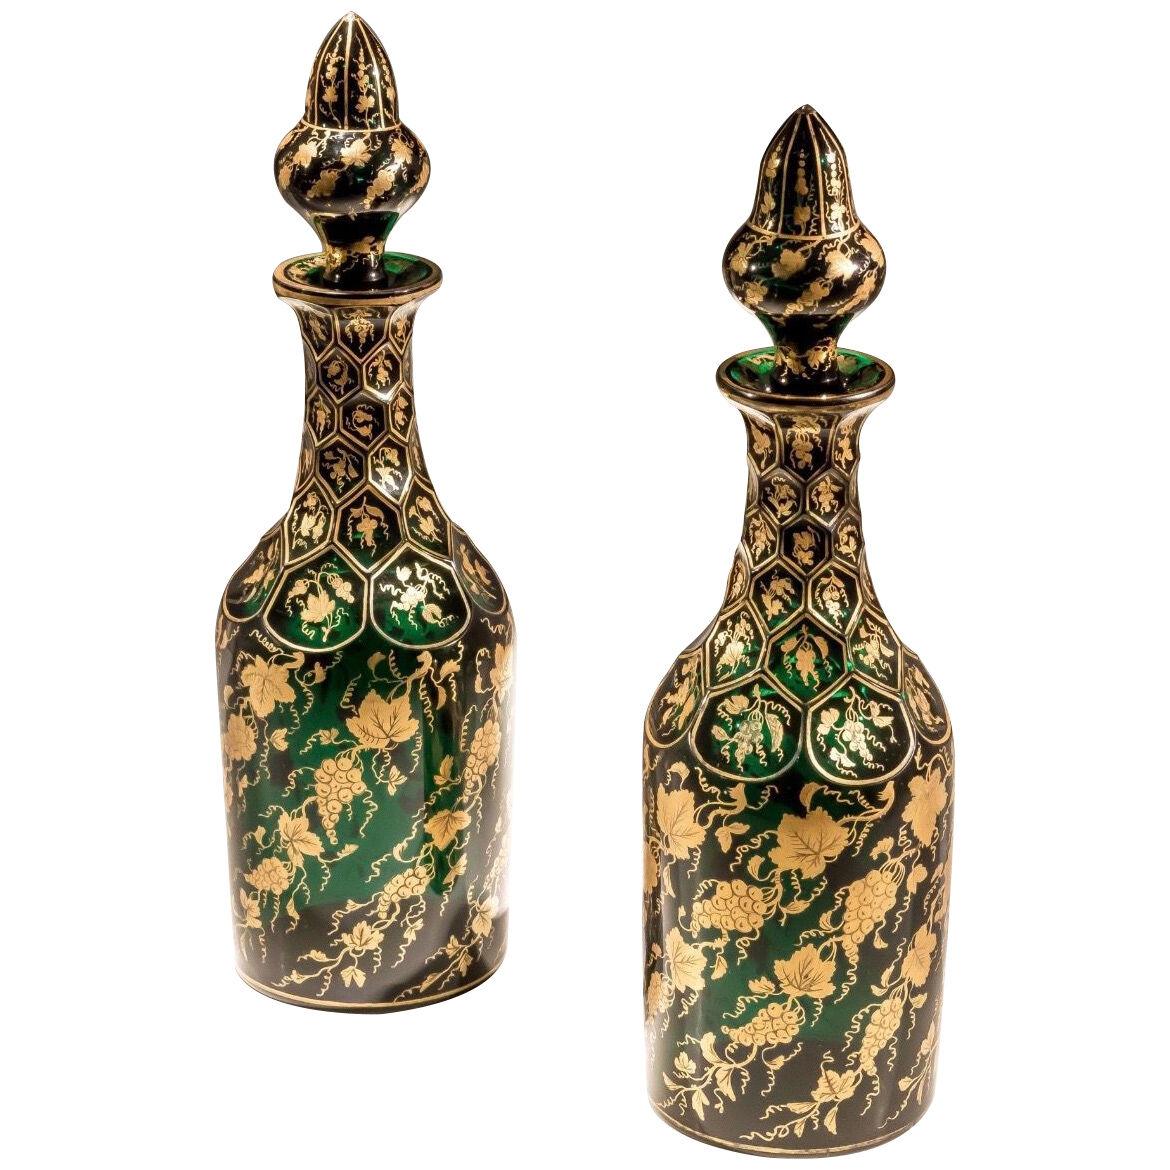 An Exceptional Pair of Green Decanters